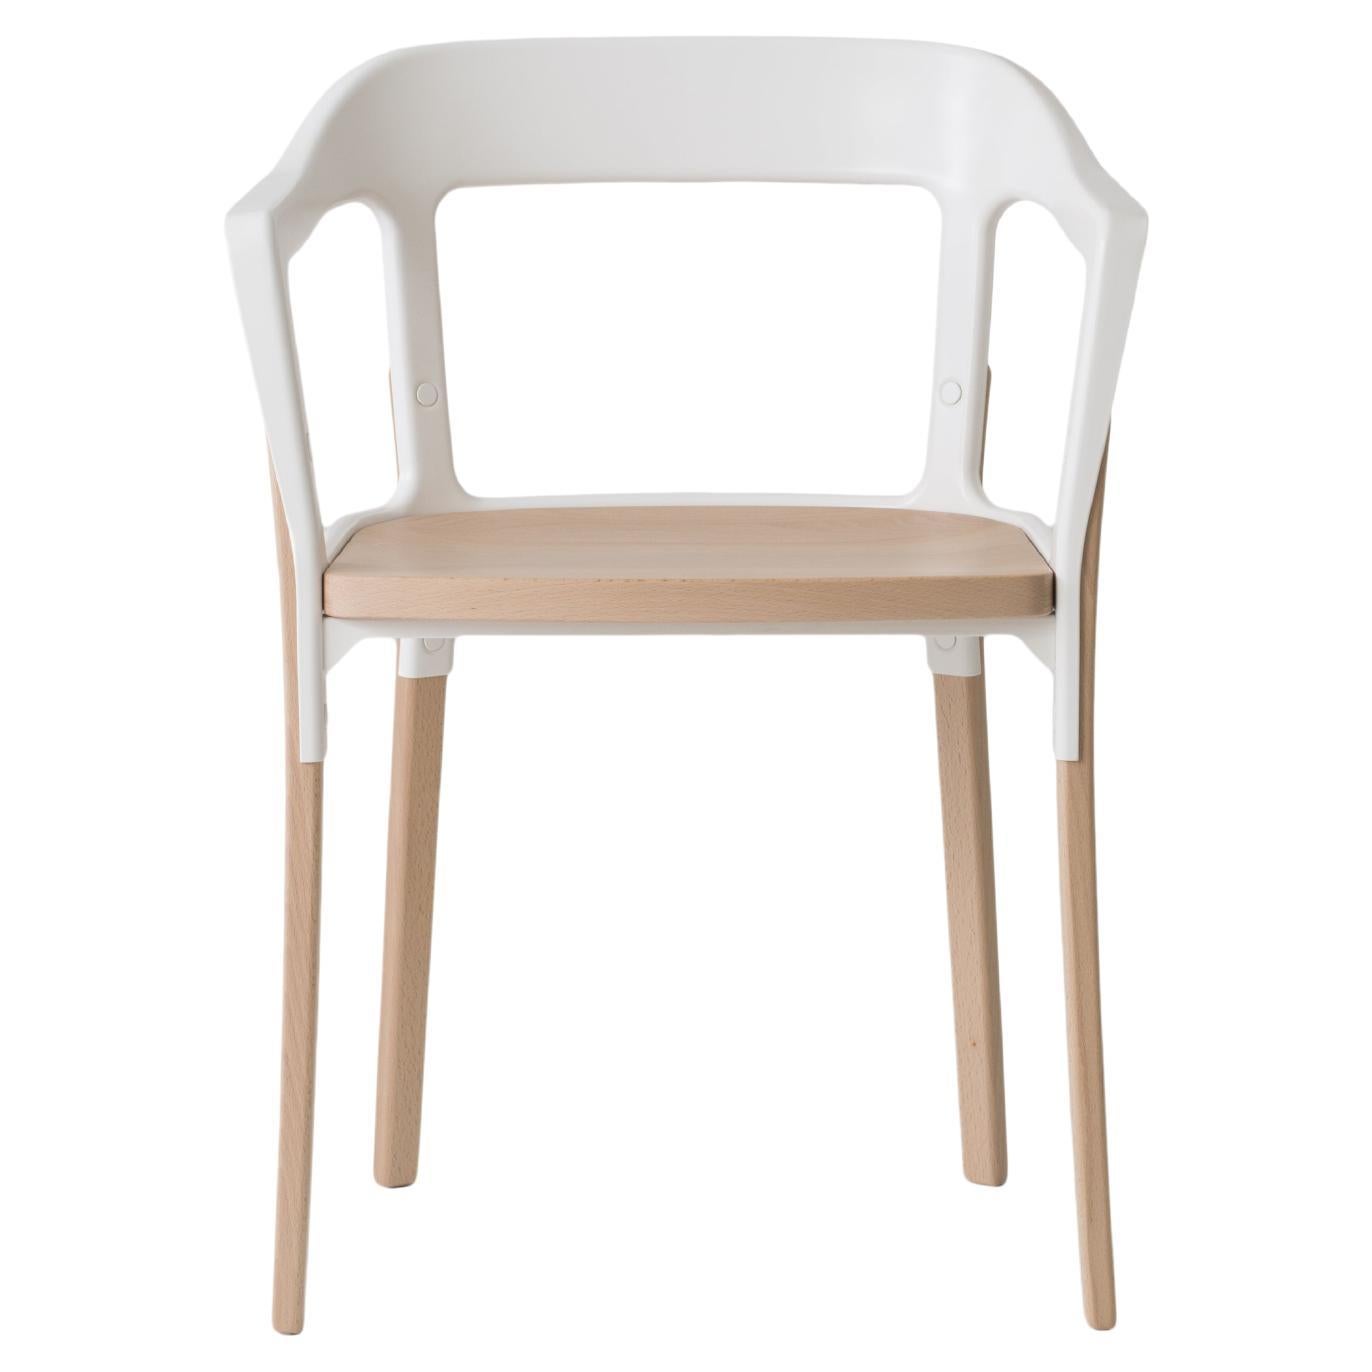 Steelwood Chair in Natural/White by Ronan & Erwan Boroullec for MAGIS For Sale